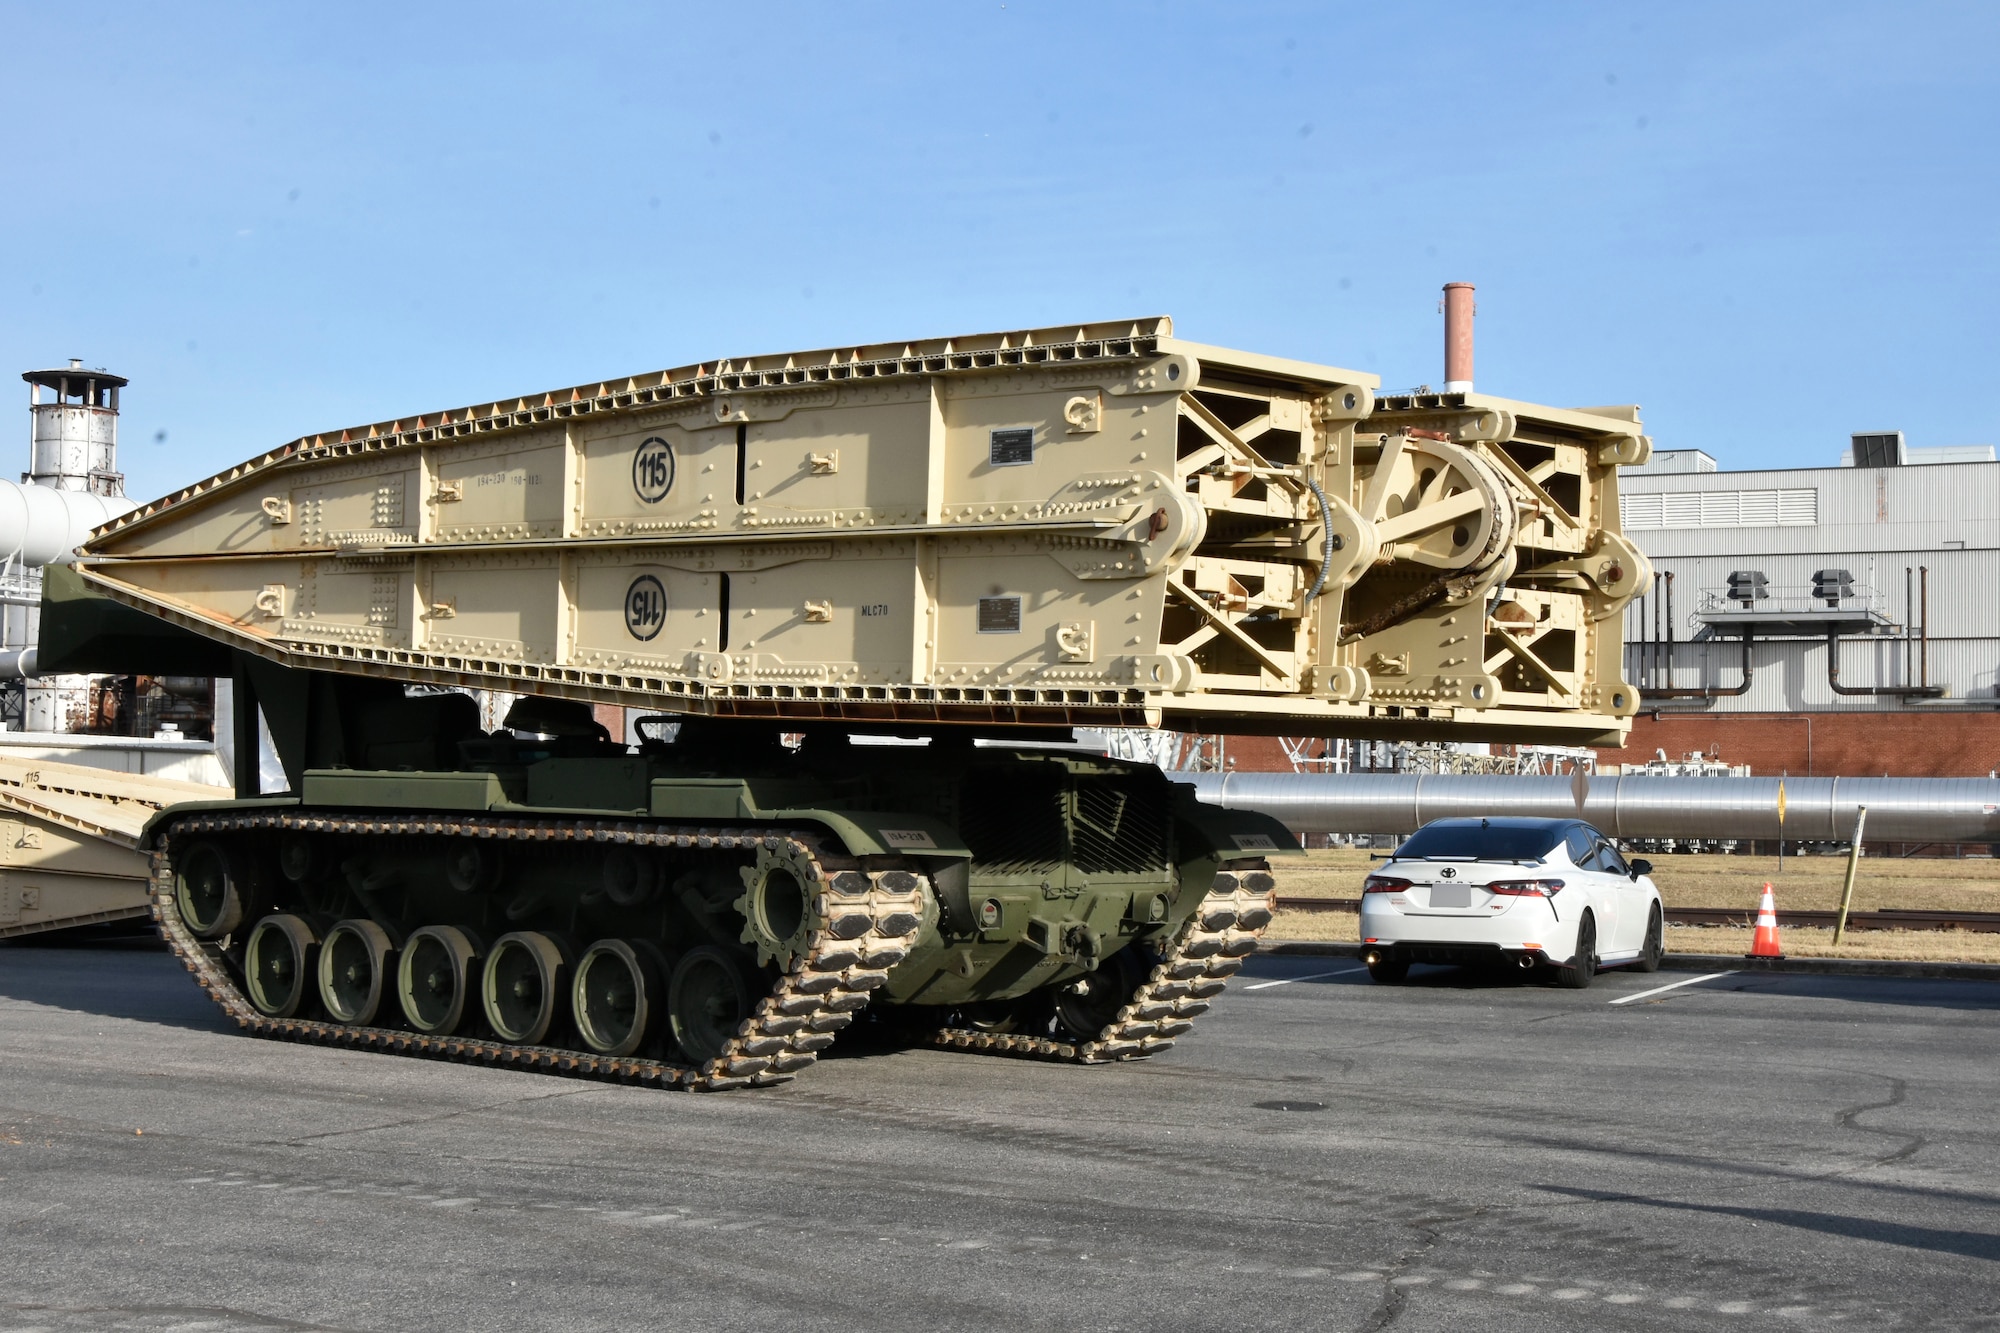 An Armored Vehicle Launched Bridge arrives at Arnold Air Force Base, Tenn., Nov. 30, 2023. AVLBs carry a deployable bridge and are designed to allow tanks, infantry fighting vehicles and other tactical vehicles to cross small rivers, gaps and other terrain obstacles on the battlefield. The AVLB was commercially delivered from Fort Campbell, Ky., and was needed to move a large crane across an Arnold alleyway where the axle load limit was less than the weight of the crane. The bridge component of the AVLB was emplaced on Jan. 6, 2024, to allow the crane entrance into the work area. The AVLB was operated by a Guardsman with the 190th Engineer Company of the Tennessee National Guard, while Guardsmen from the 194th Engineer Brigade directed and guided the operation. (U.S. Air Force photo by Bradley Hicks) (This image was altered by obscuring a vehicle license plate)